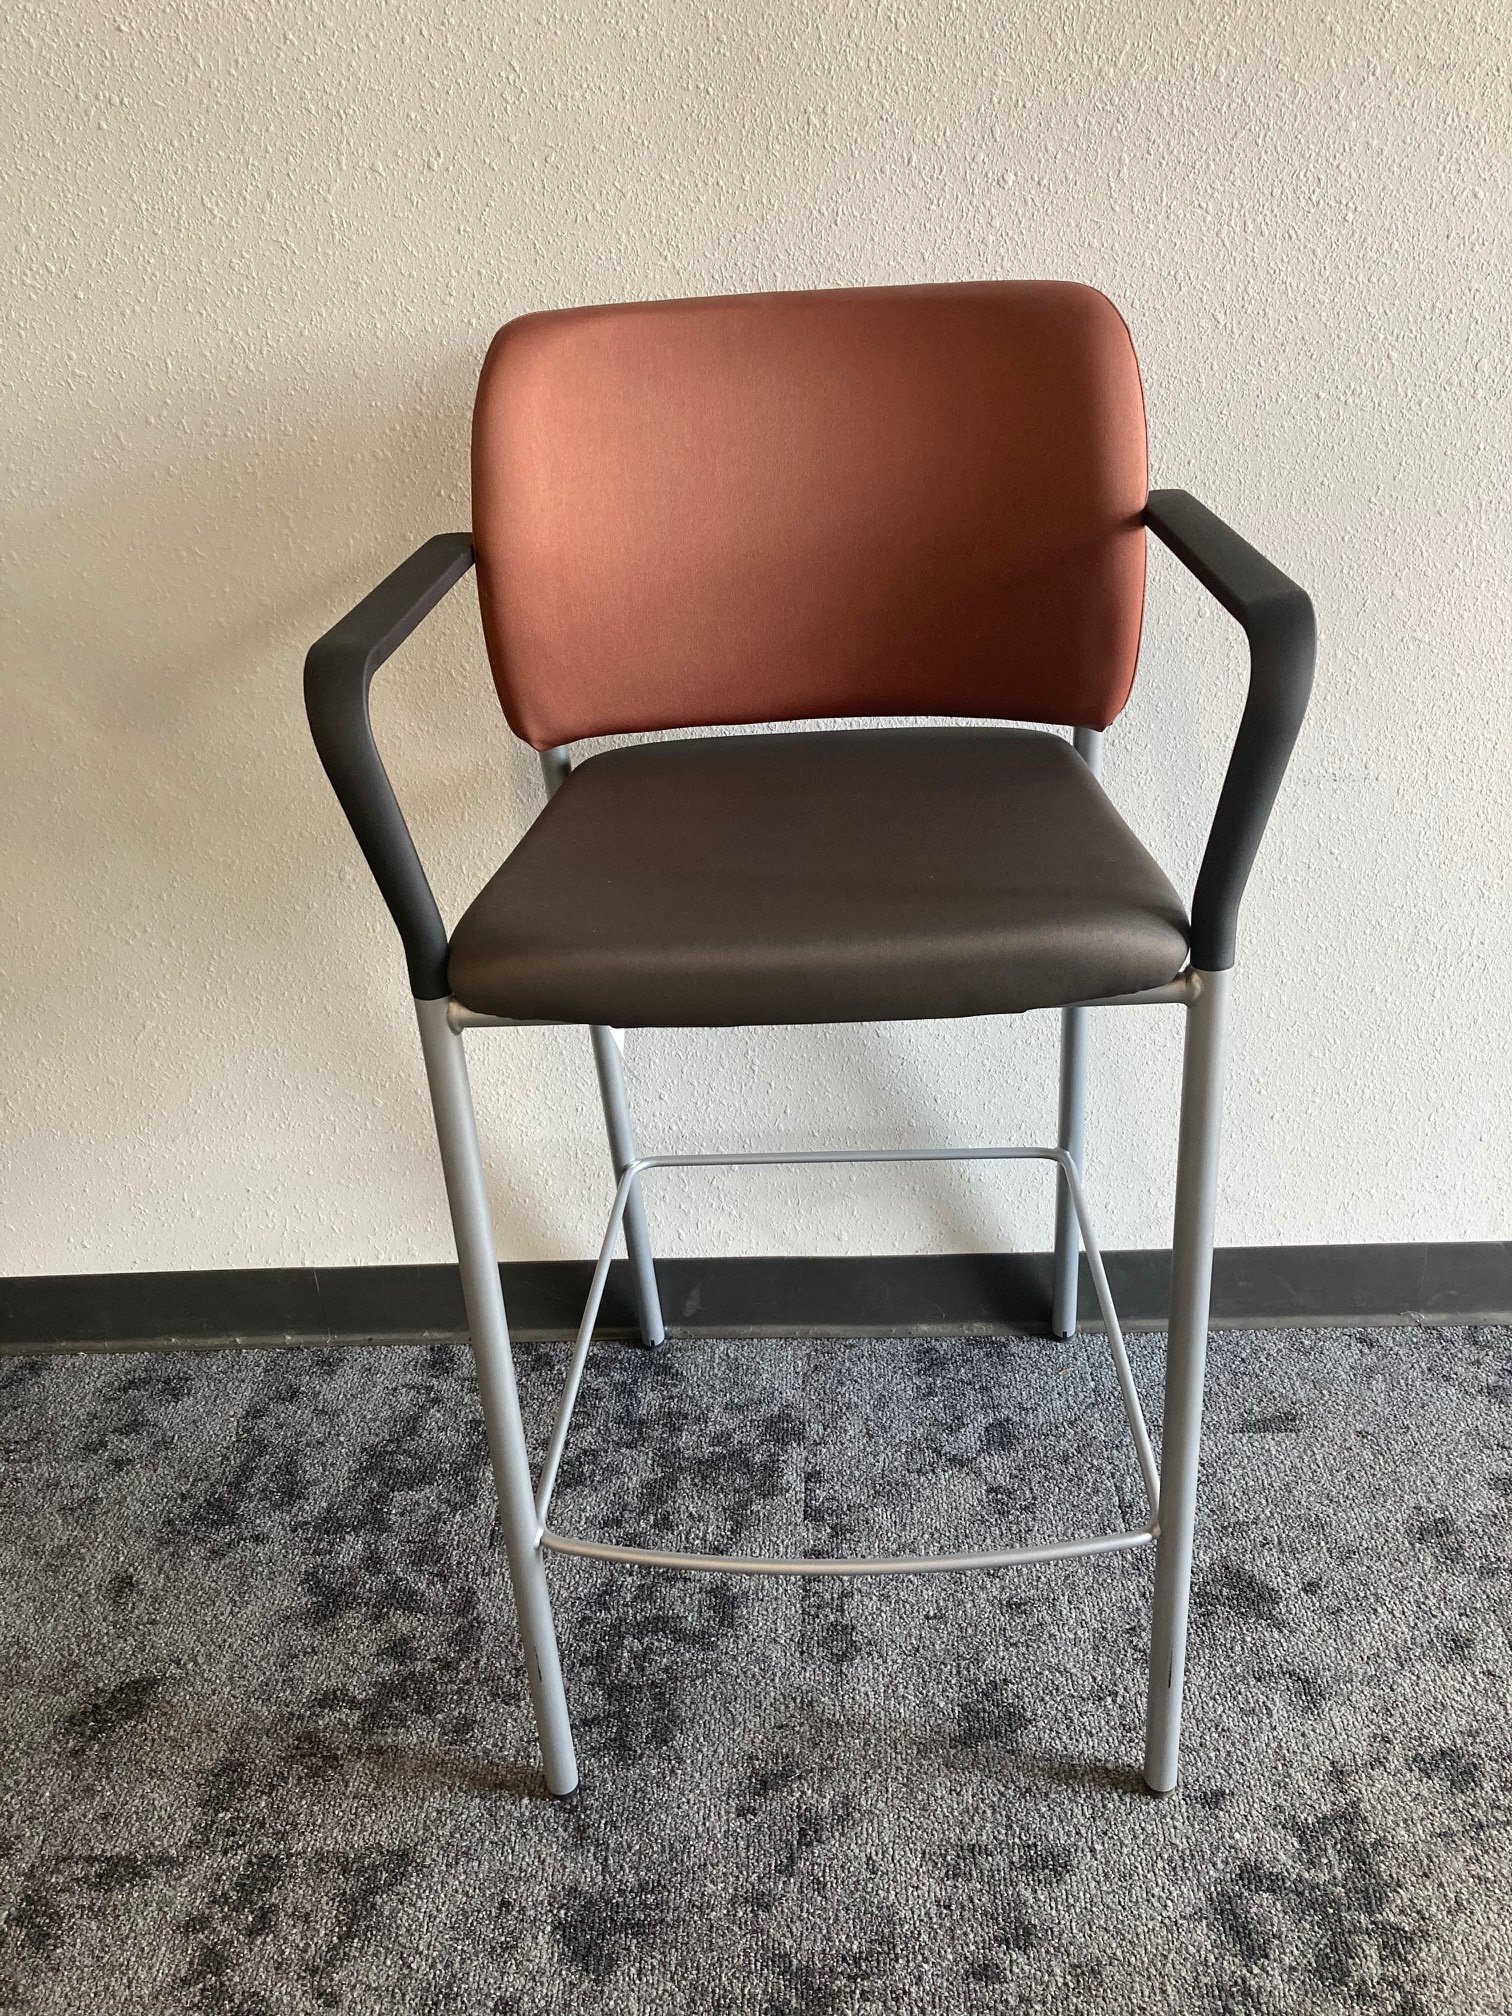 New Office Stool, Bar Height Stool, Office Furniture